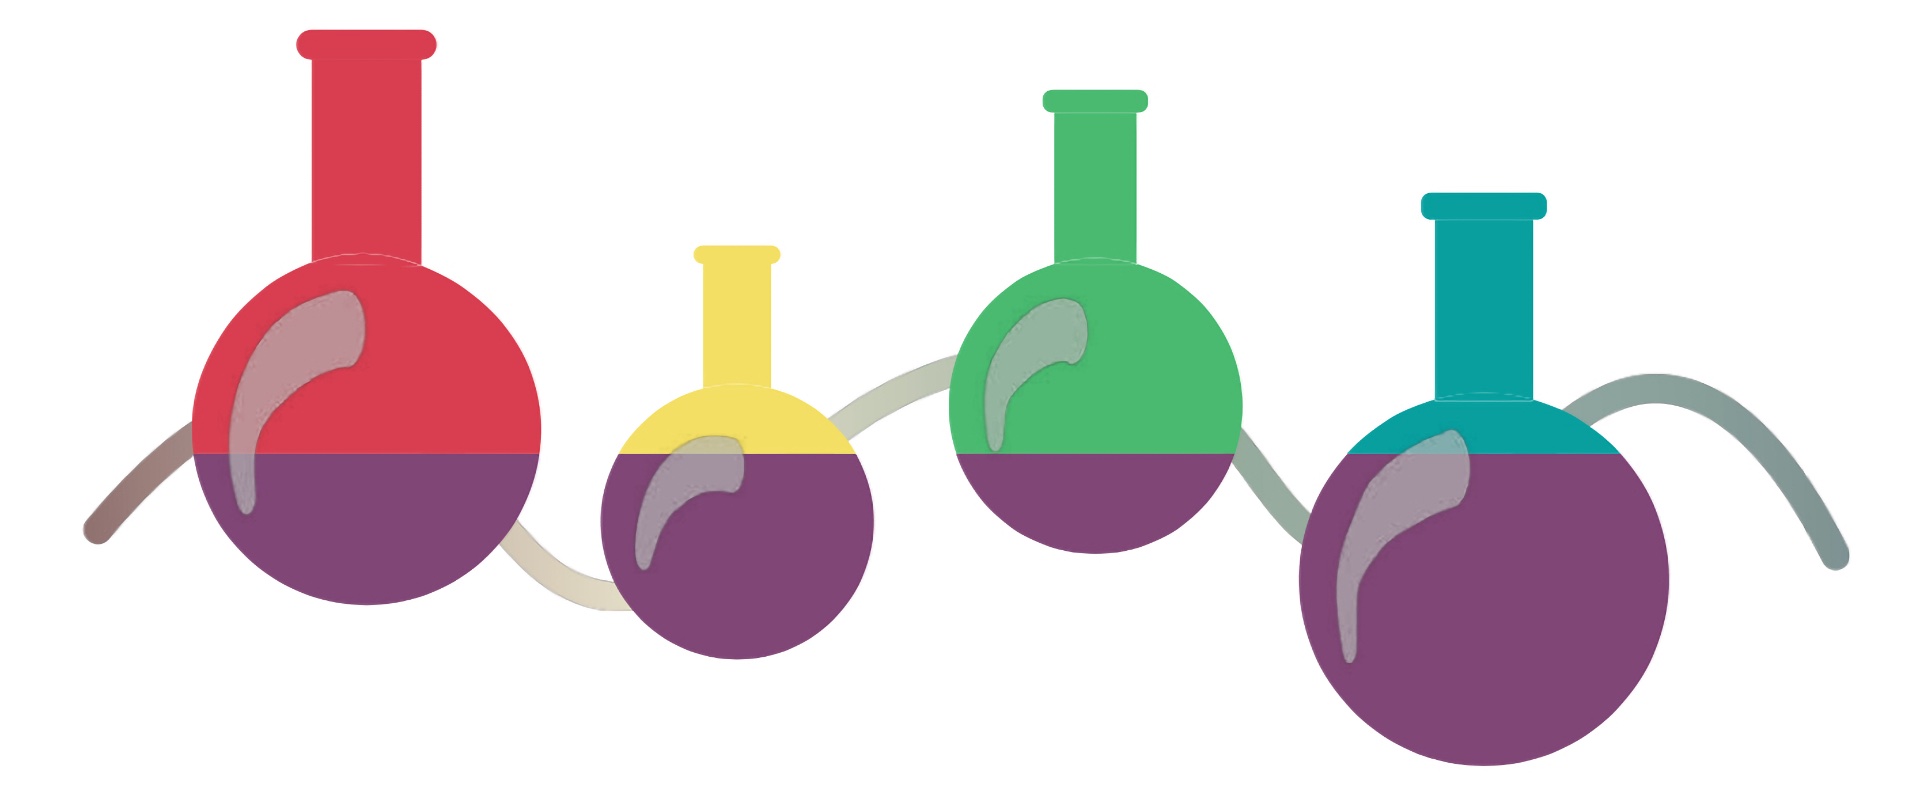 Four lab flasks in a row, colored red, yhellow, green, blue, half-filled wth purple liquid and all connected together in a linear flow